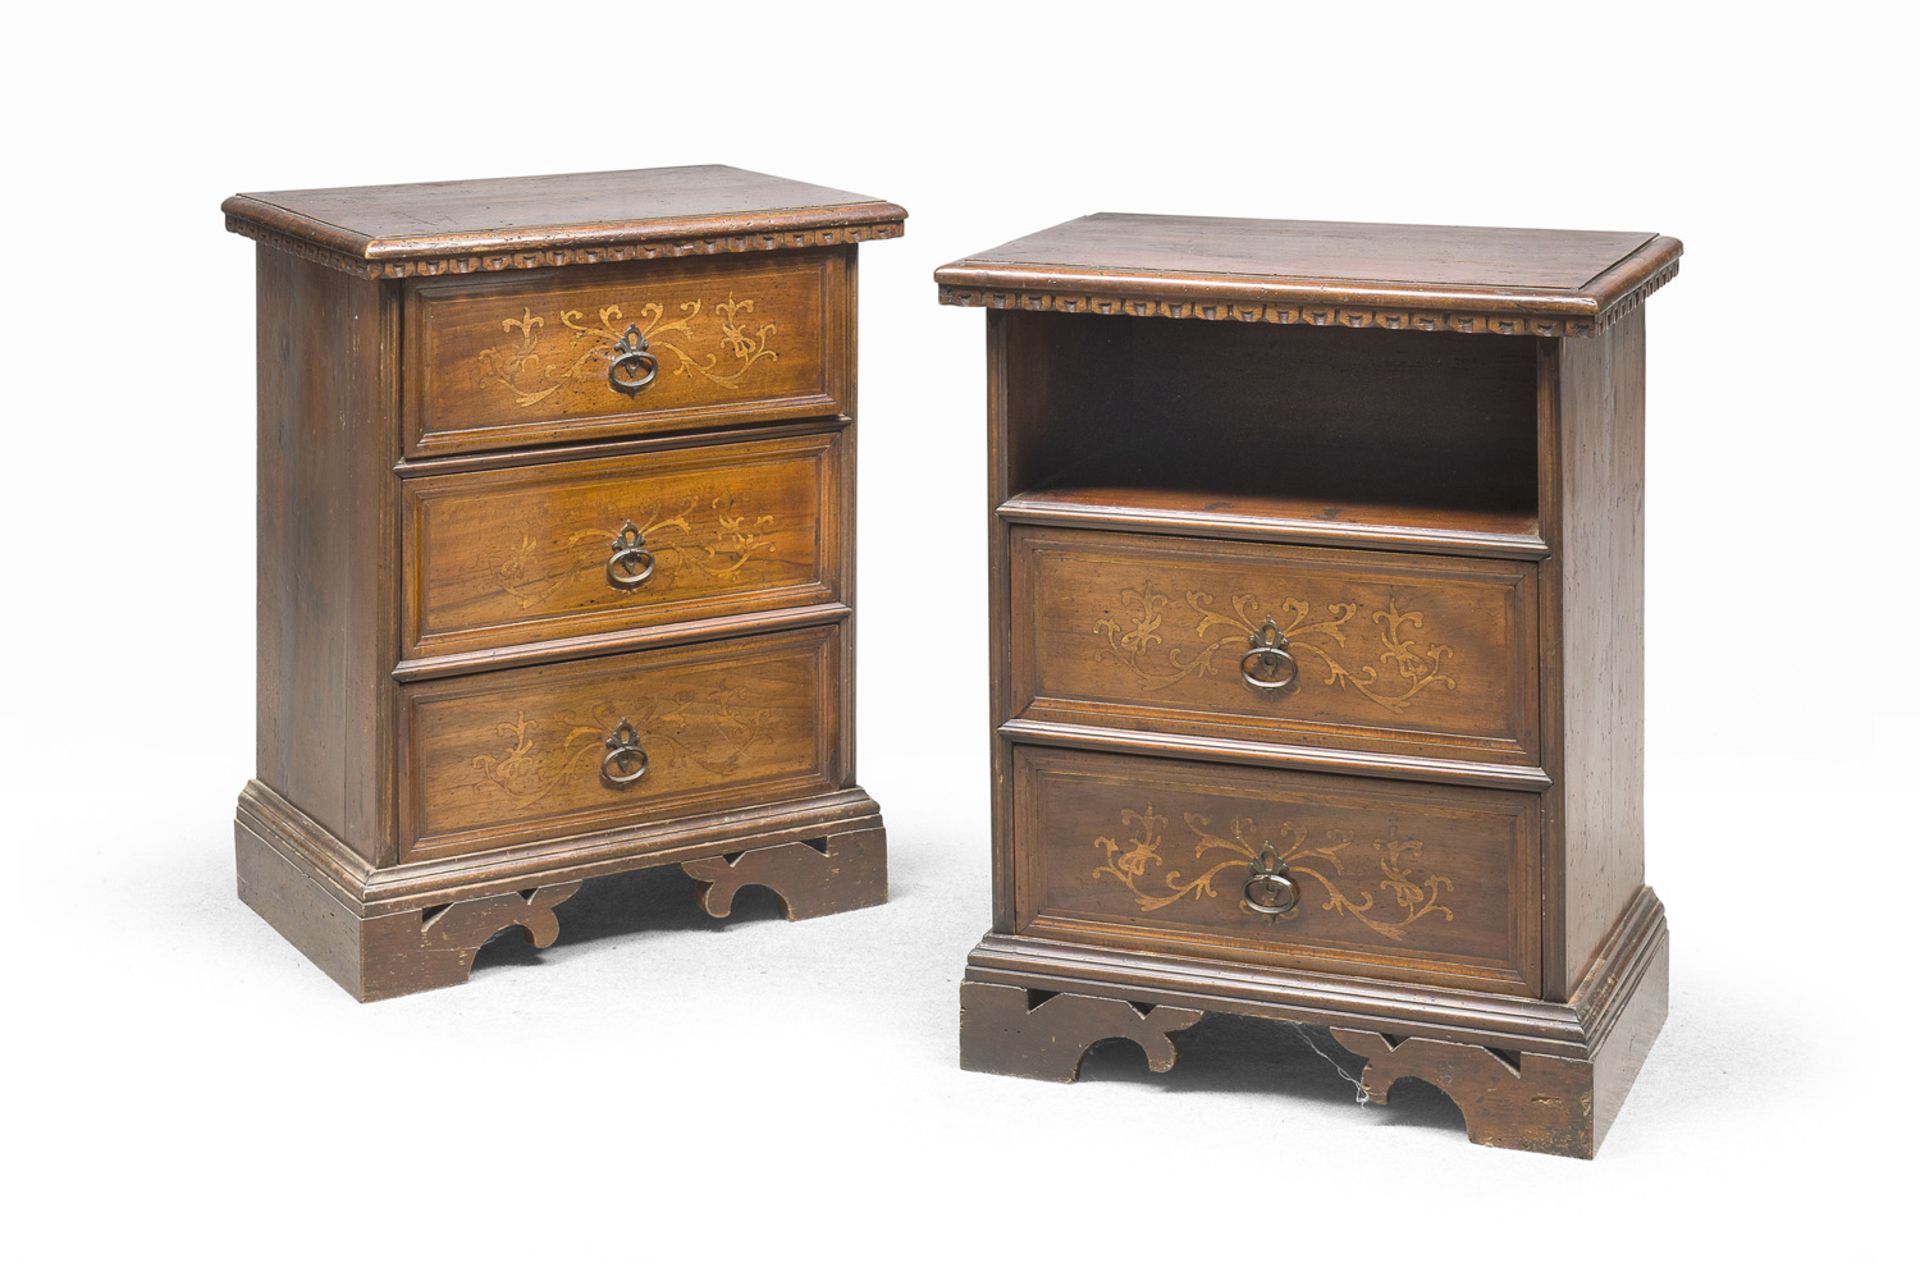 PAIR OF WALNUT BEDSIDE TABLES LATE 19TH CENTURY